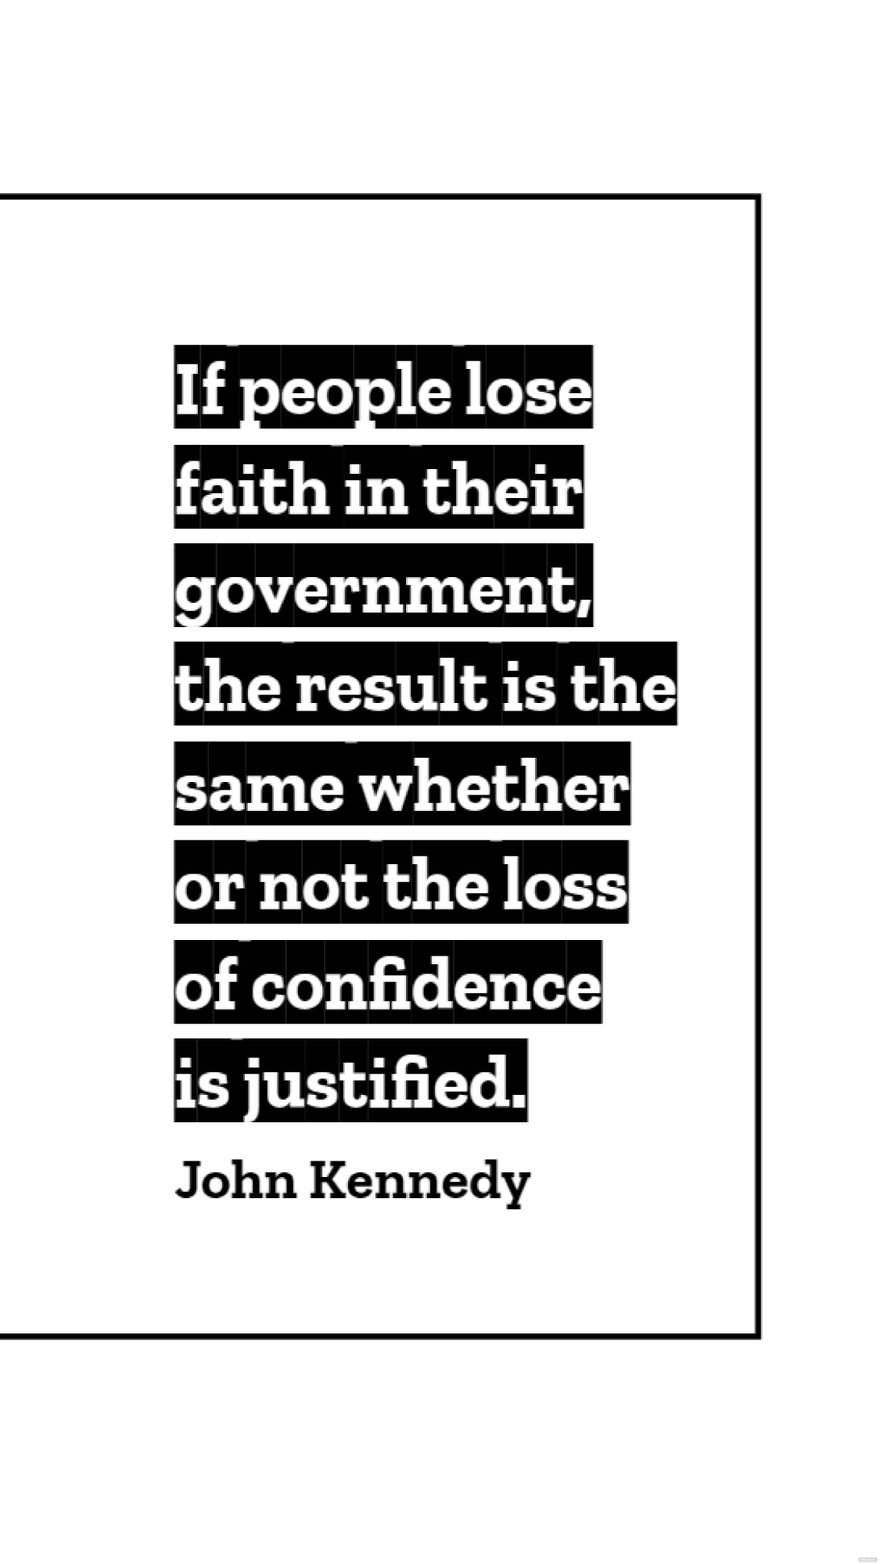 John Kennedy - If people lose faith in their government, the result is the same whether or not the loss of confidence is justified.